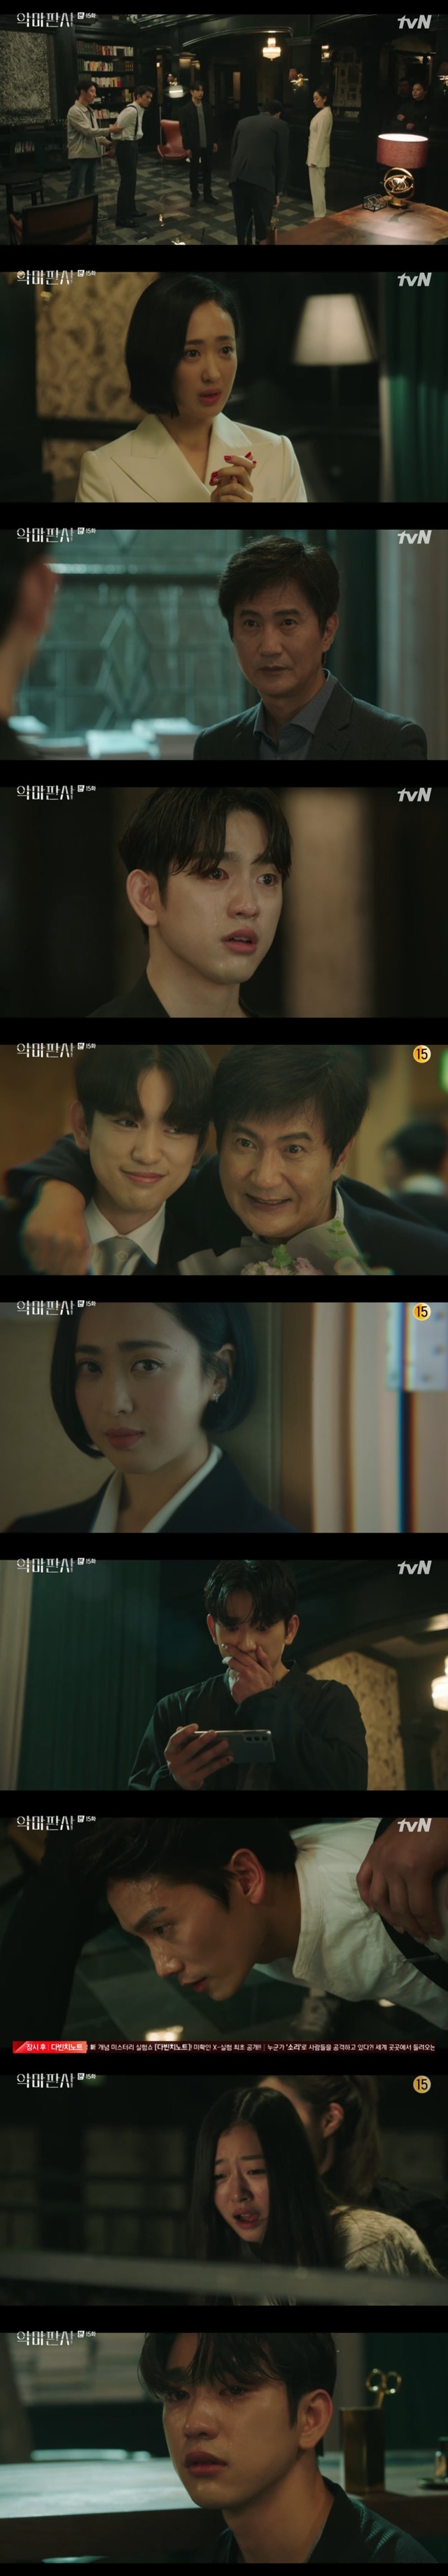 Reversal story revealed that Kim Min-jung sent Jinyoung to Ji Sung behind Ahn Nae-sangIn the 15th episode of TVNs Saturday Drama The Devil Judge (played by Moon Yoo-seok/directed by Choi Jung-gyu), which was broadcast on August 21, it was revealed that Jim Seona was behind Min Jeong-ho (played by Ahn Nae-sang).Min Jeong-ho (Ahn Nae-sang) suspected Ga-on Kim that Yoon Soo-hyun (Park Kyu-young) was also removed by Kang after he was followed by Kang, but Ga-on Kim said, It is not that monster.Im sorry, he said, adding that he was frustrated by the people who were attacked by Supreme Court Justice Min Jeong-ho and his supporters, but he is a pissant.Heo Jung-se was determined to sort out all the surplus people at all, and Jeong Seon (Kim Min-jung) slapped Heo Jung-se and said, There is a limit to holding back.You are a clown who I have a scarecrow in. Jeong Seon, in cooperation with Park Doo-man and Min Yong-sik, said, I have to think about the plan.We are going to build the next president, he said.When the people were rather impressed by Kangs confession and tried to join the opposition party as a presidential candidate, Jeong Seon decided to put Heo Jung-se in the presidency for a while.Min Jung-ho handed Ga-on Kim a police notebook, which is a relic of Yoon Soo-hyun, and Ga-on Kim followed Yoon Soo-hyuns last track of John.After meeting Yoon Soo-hyun, he was tortured by Kang John Suha and handed over a copy of the CCTV, Jung said.Ga-on Kim got a car number from Jung Yo-seop and asked Min Jung-ho to trace it.Ga-on Kim was a river John Suha Yoon Su-hyun Murder, and when he called the remaining YH on his murdered cell phone, he received it.Ga-on Kim went to Kang with a weapon that convinced him that he had killed Yoon Soo-hyun, where Min Jung-ho came to arrest him on charges of teacher Yoon Soo-hyun Murder.After Min Jung-ho, Jin Seona came to the scene and the Reversal story was unfolded.Jeong Seon was behind Min Jeong-hos decision to become a Supreme Court justice and Ga-on Kims decision to the river. Youre the weakness I planted for him, he said.Jeong Seon also showed Ga-on Kim a copy of the CCTV he took from Jung Joseph, who was killed by Elijah (played by Jeon Chae-eun) who knocked down the candles in the cathedral fire.